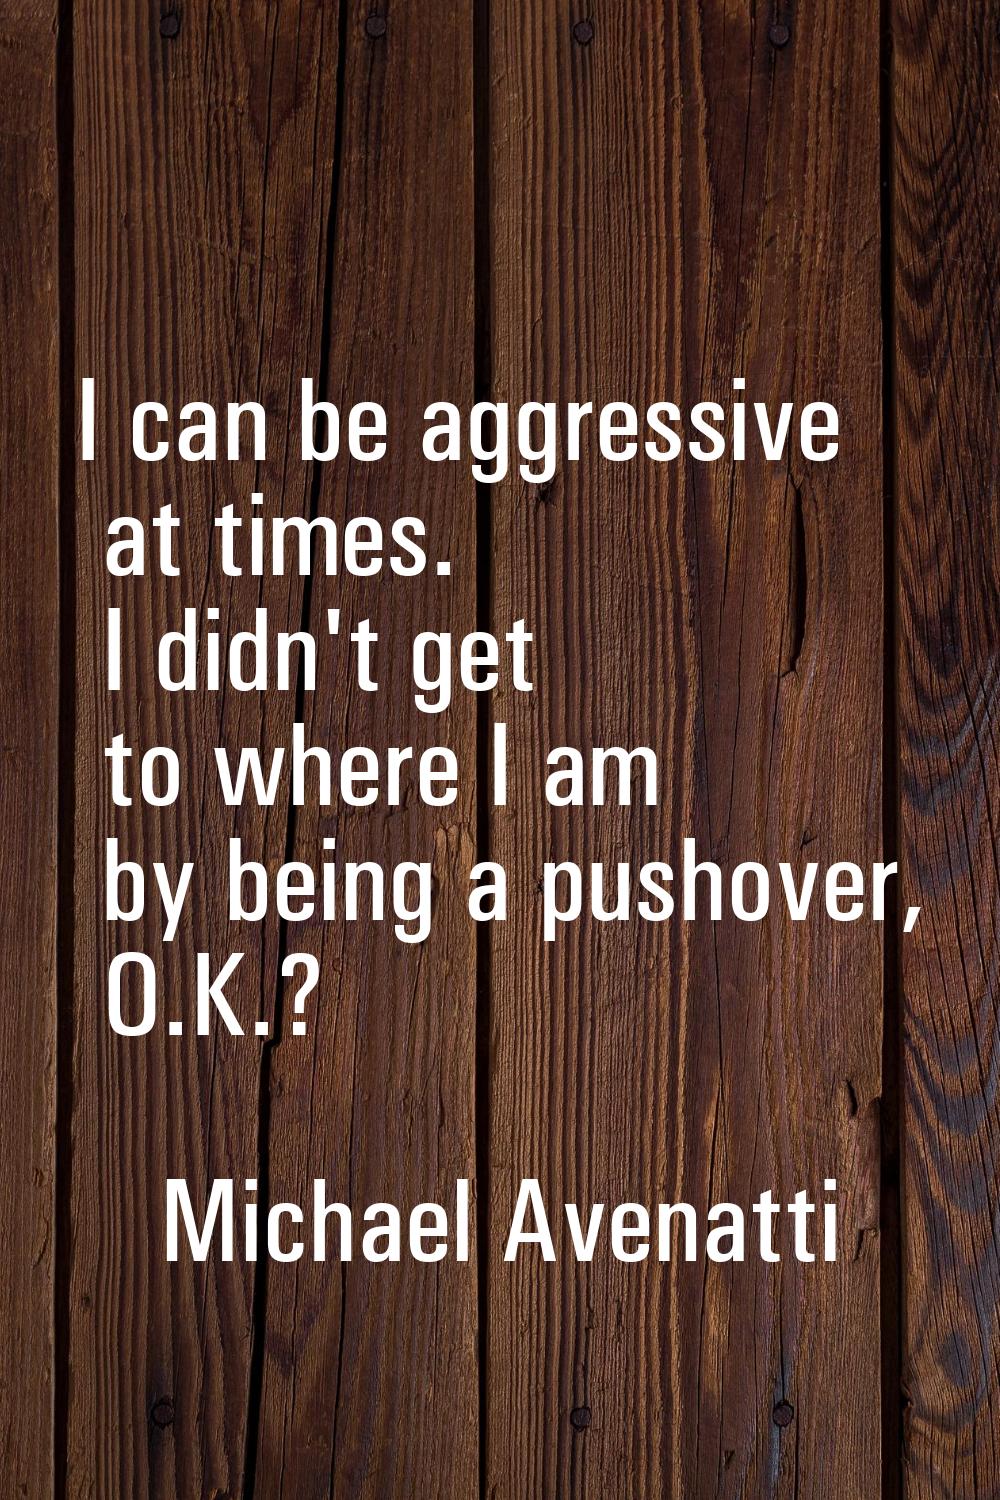 I can be aggressive at times. I didn't get to where I am by being a pushover, O.K.?